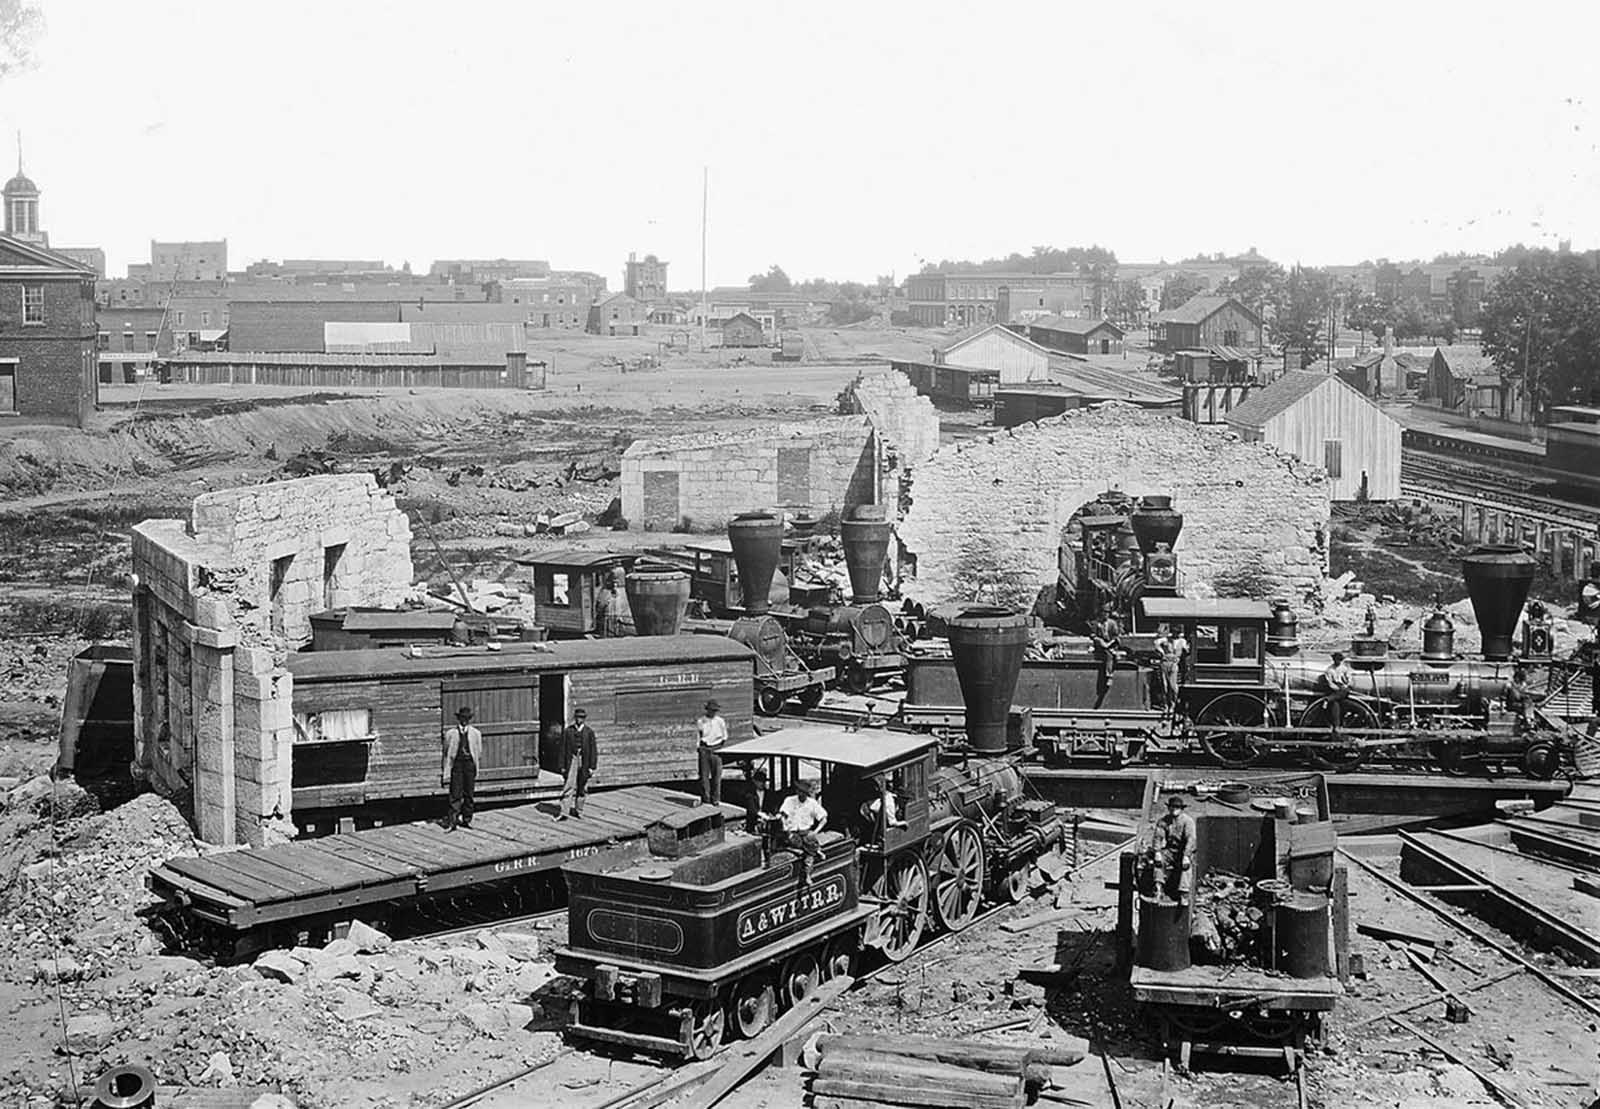 The ruins of an extensively damaged Roundhouse in Atlanta, Georgia after the Atlanta Campaign in the summer of 1864. After Union Maj. Gen. William T. Sherman captured the city, he began his destructive March to the Sea, finally taking the port of Savannah on December 21.